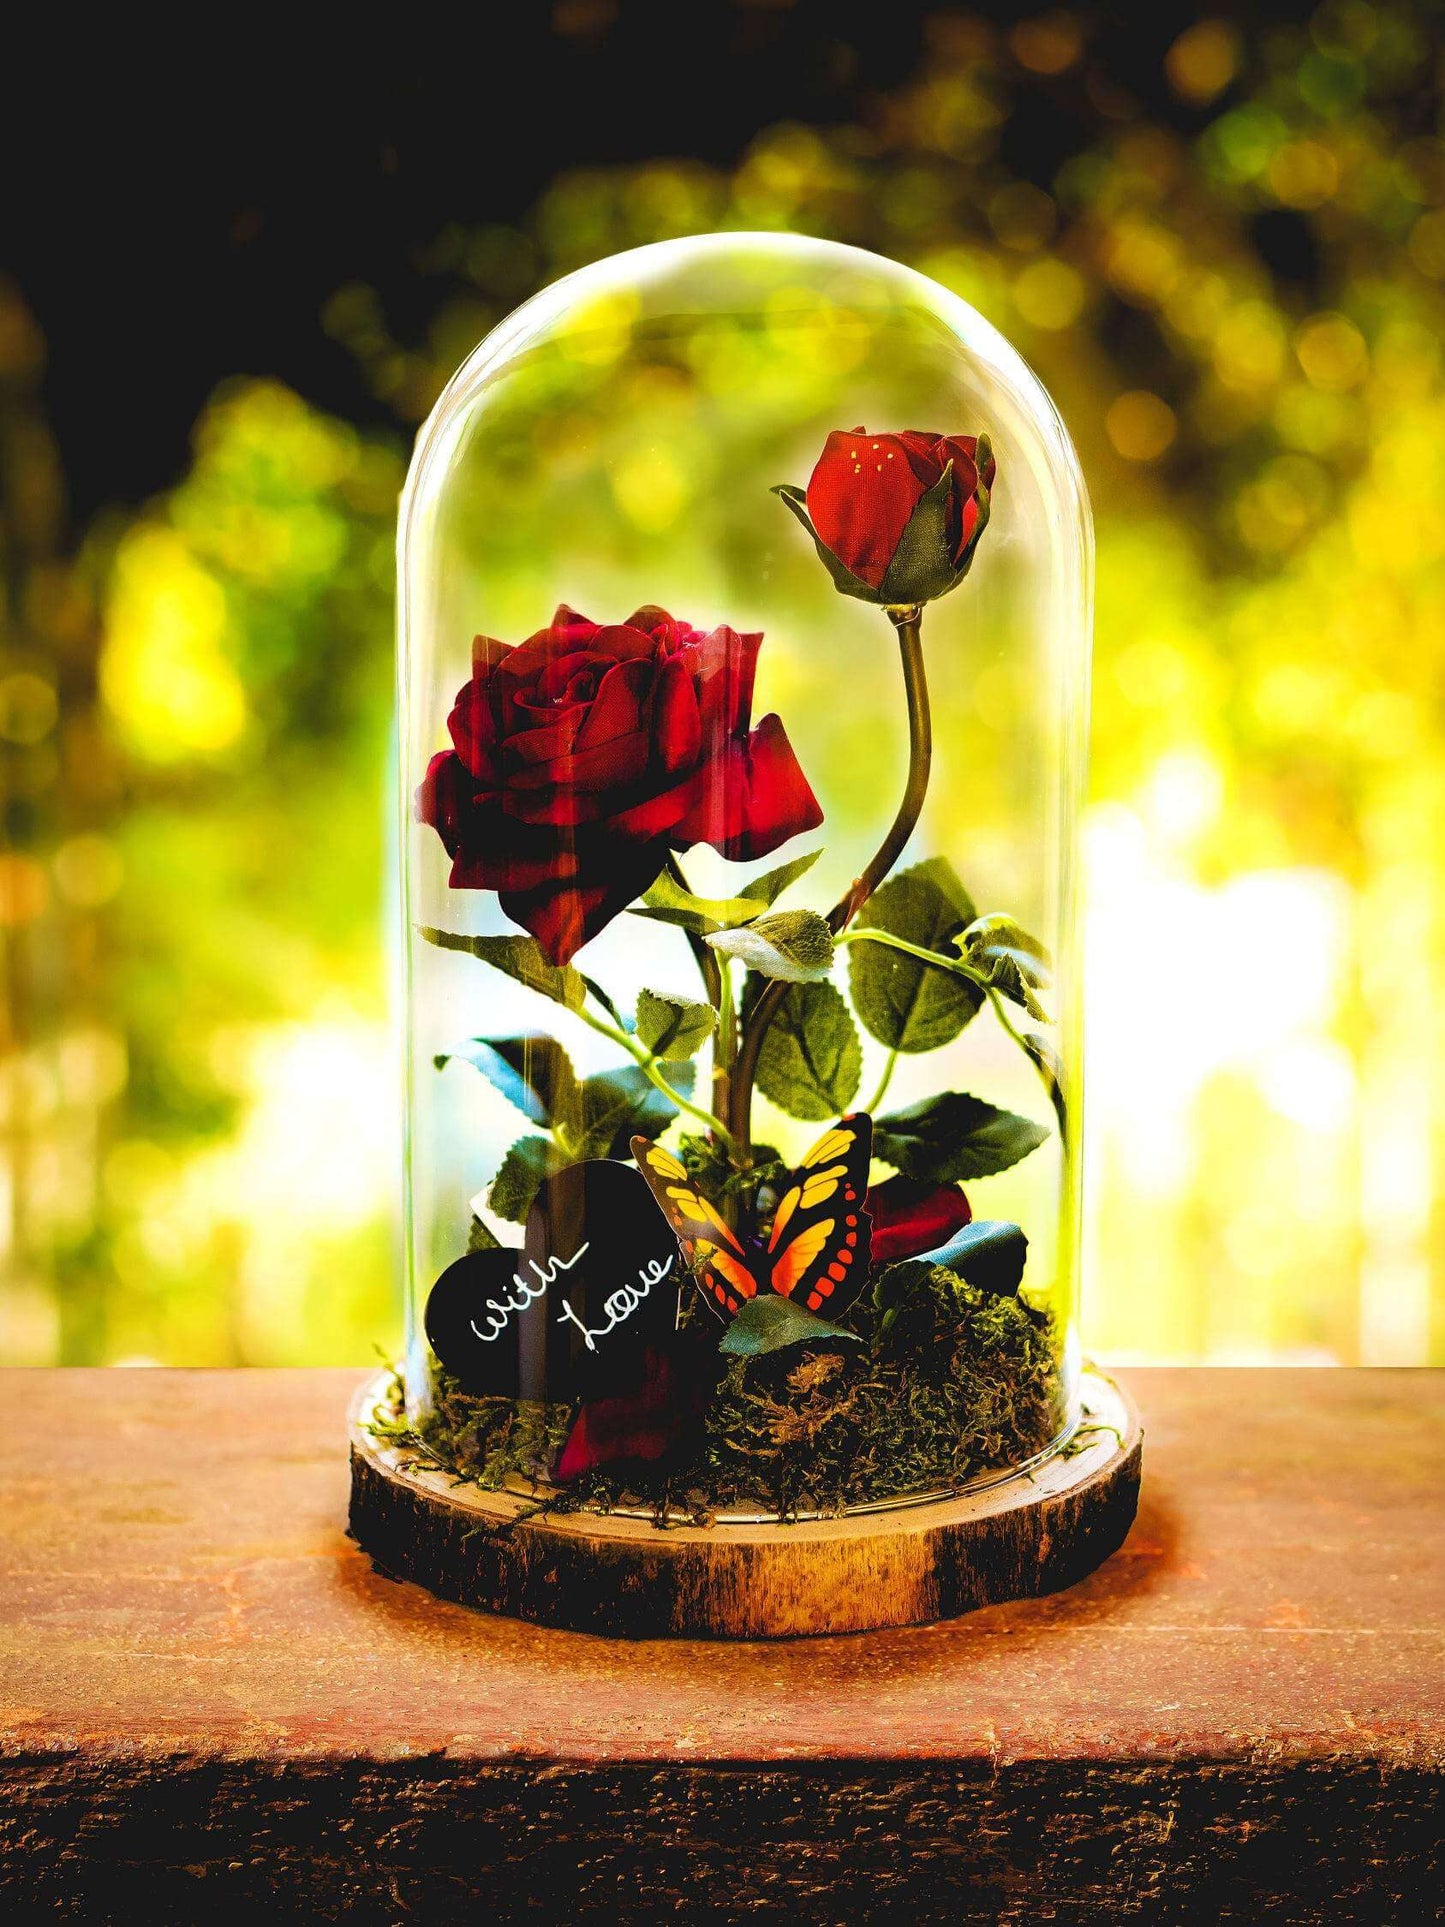 Beauty & The Beast inspired enchanted rose in a glass dome mossartbyrishstudio